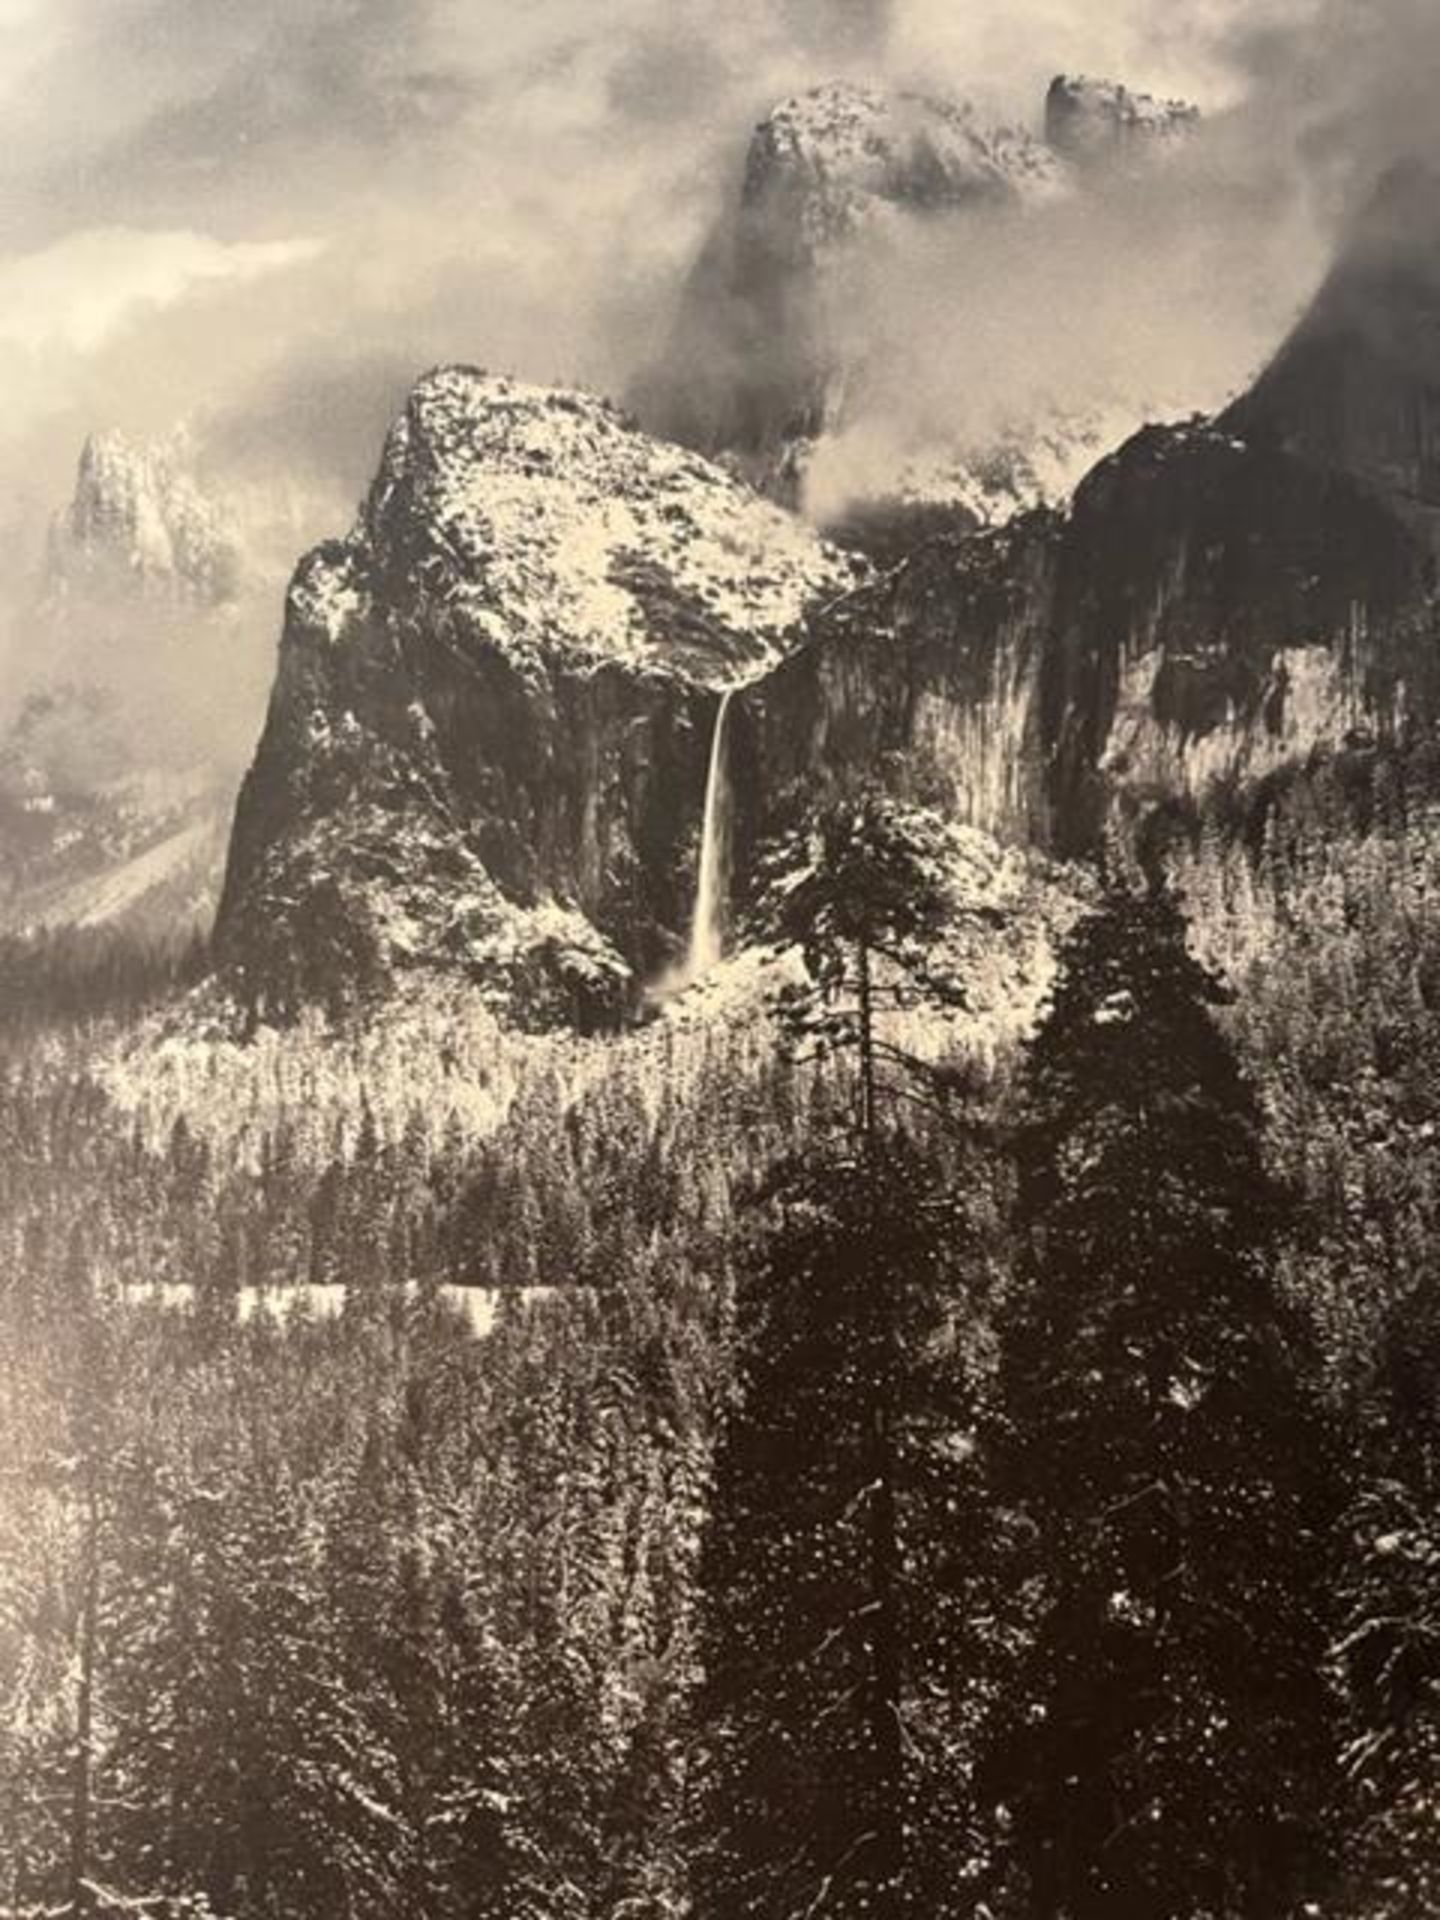 Ansel Adams "Clearing Winter Storm" Print. - Image 5 of 6